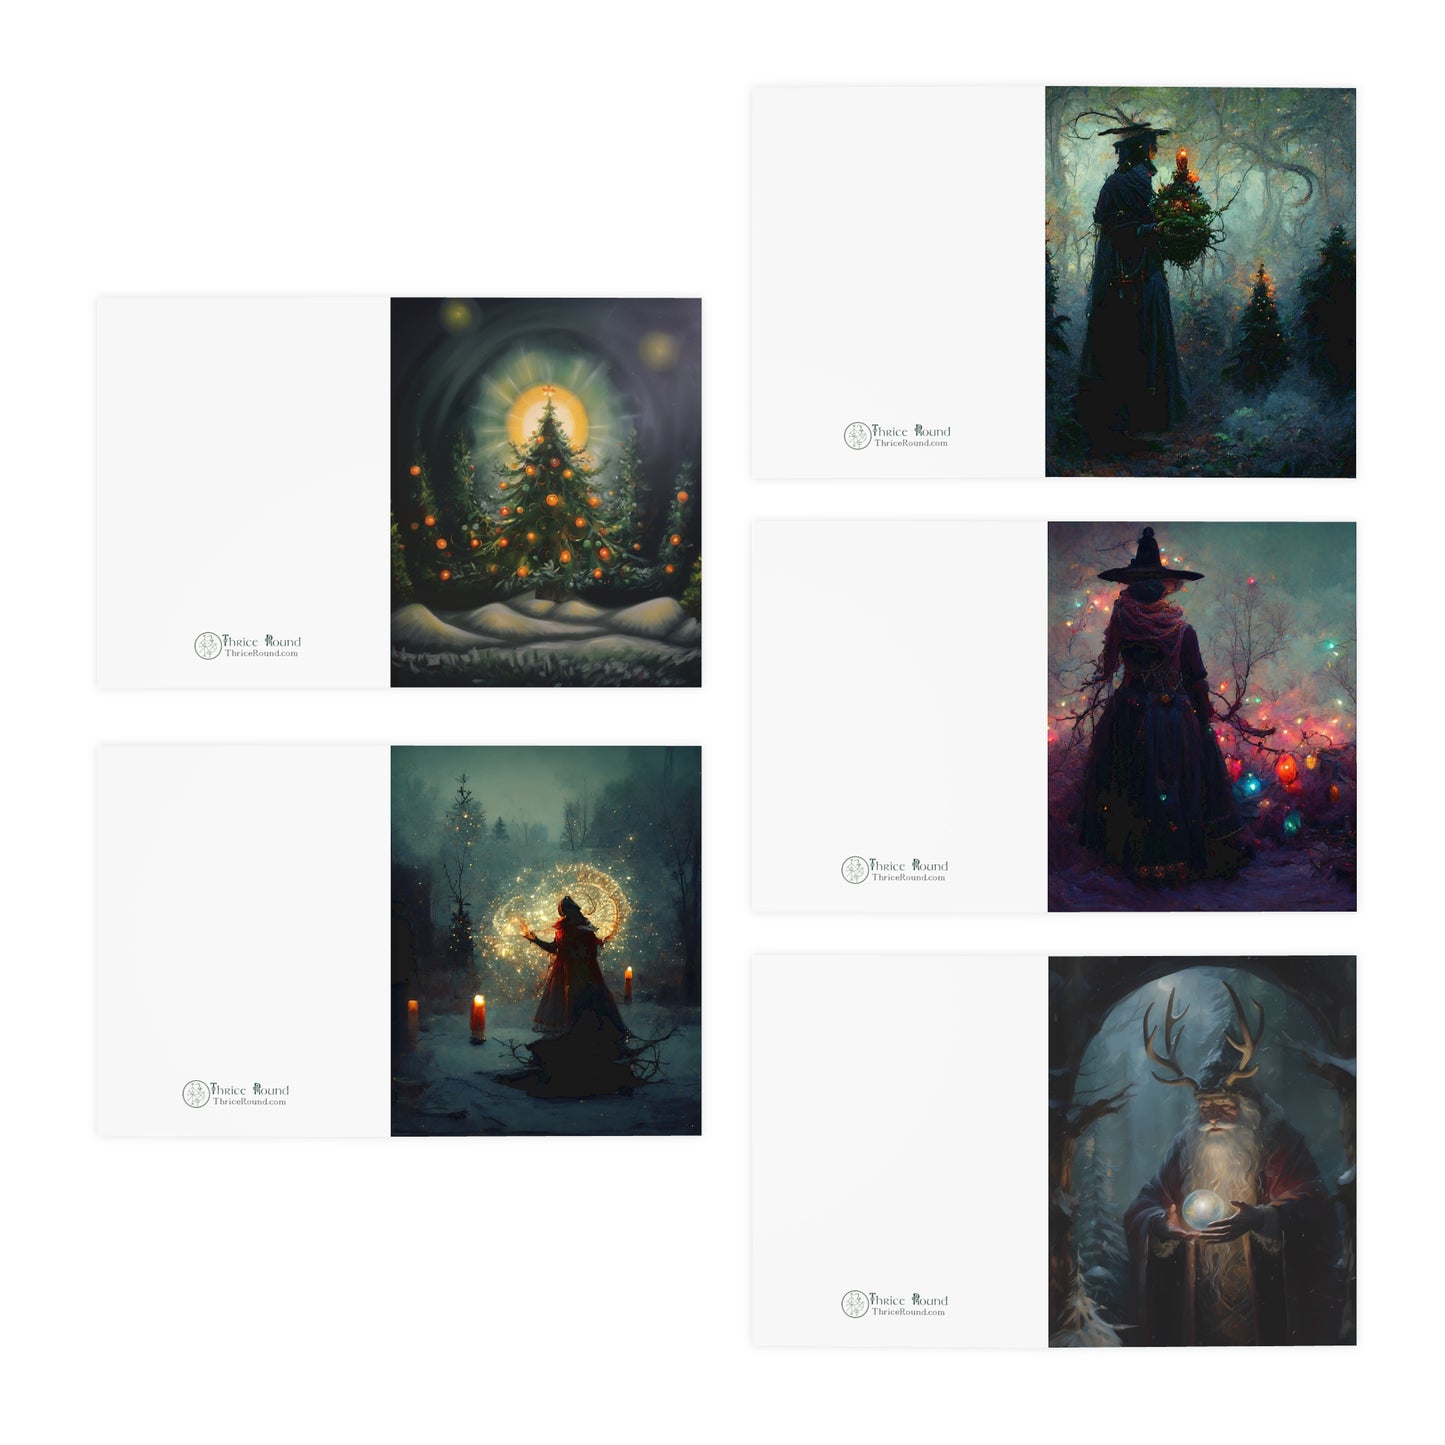 Yule Greeting Cards - 5 PACK - Set of Five Winter Solstice Greeting Cards for Pagans, Witches, Wiccans - Witchy Yule Cards Pagan Christmas